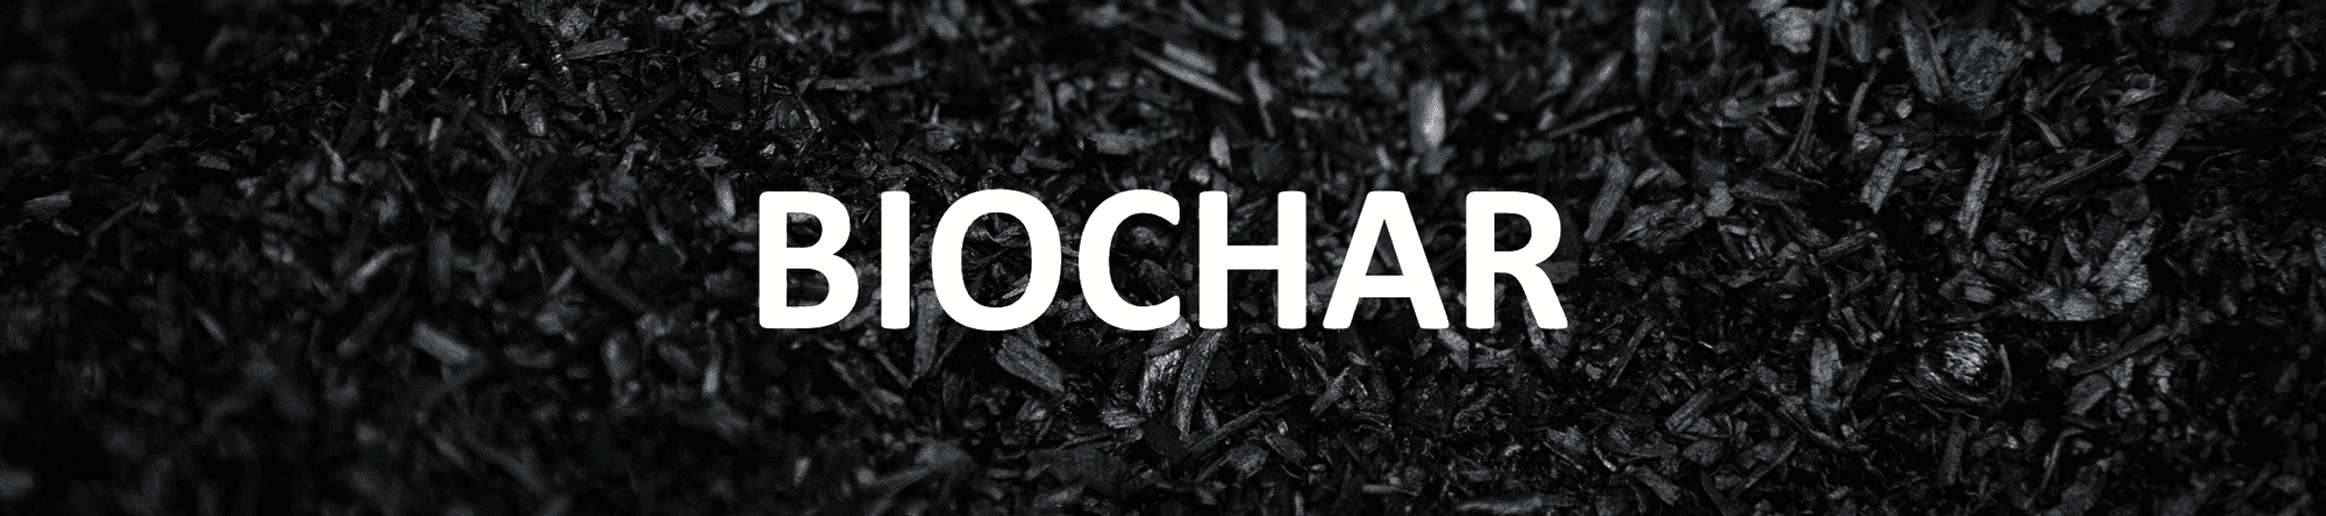 Product Thailand Carbon Removal Technology | Biochar for Agriculture Australia image